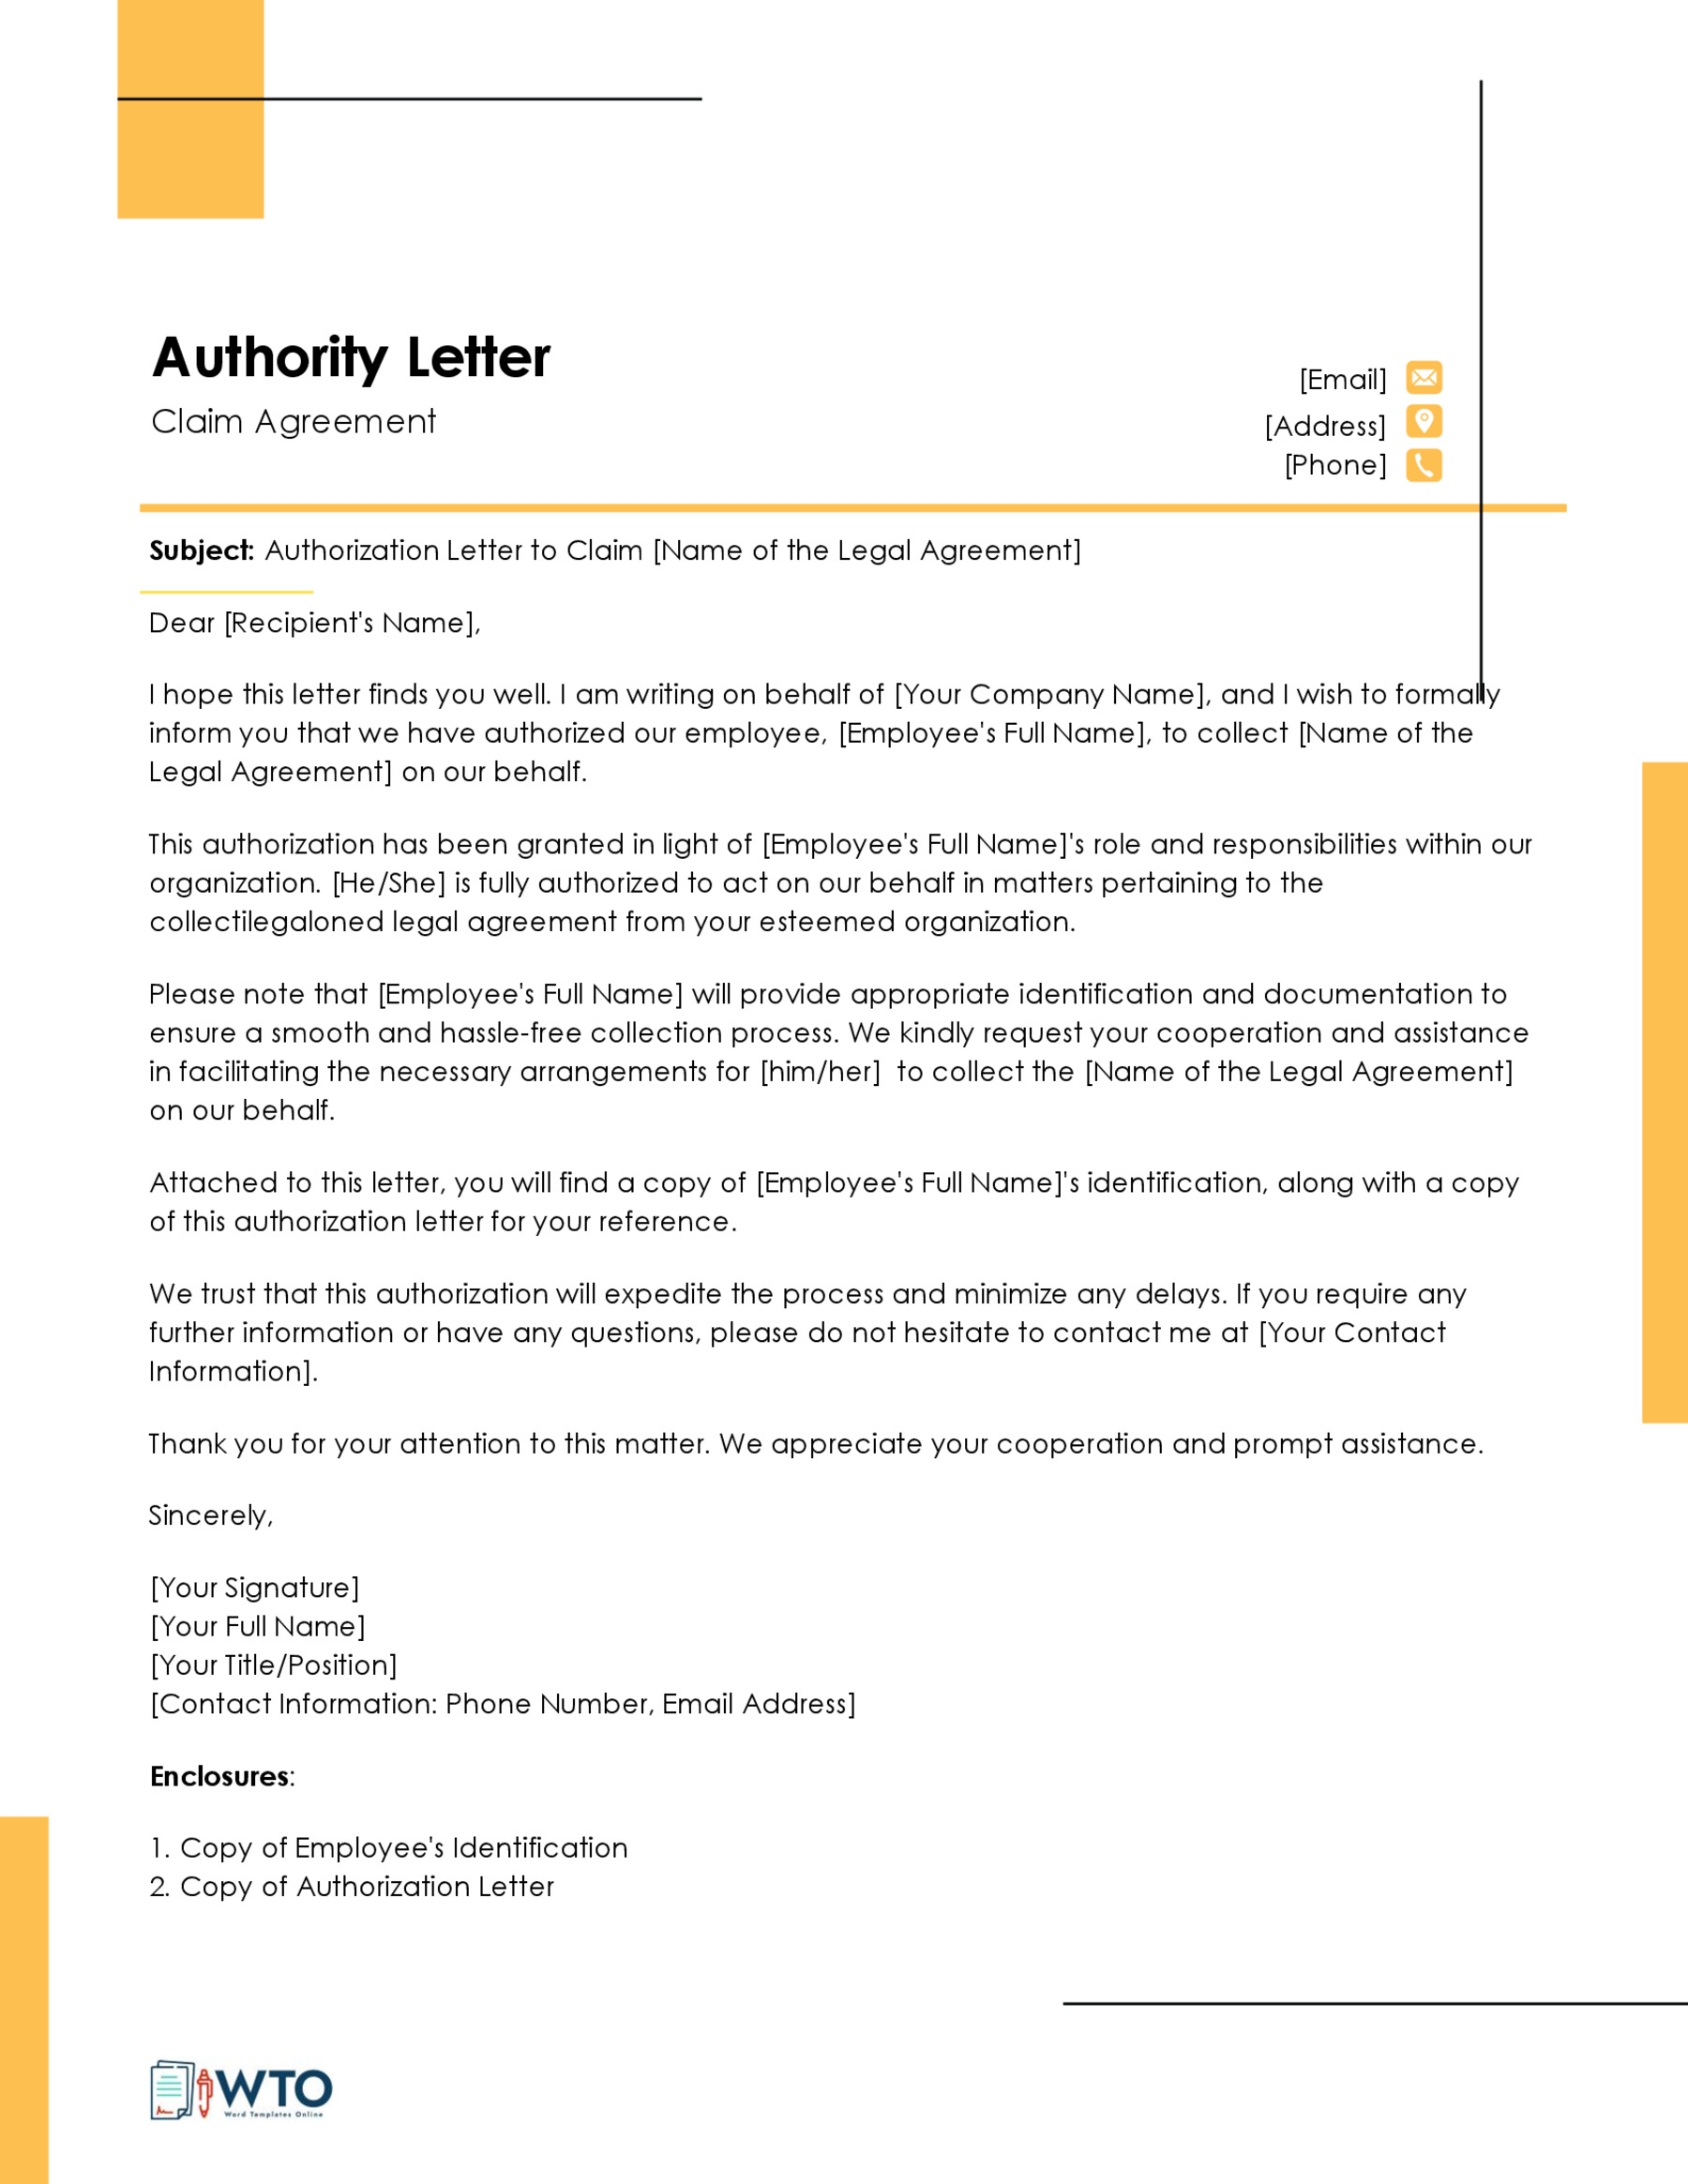 Authorization Letter to Claim Template-Downloadable word format